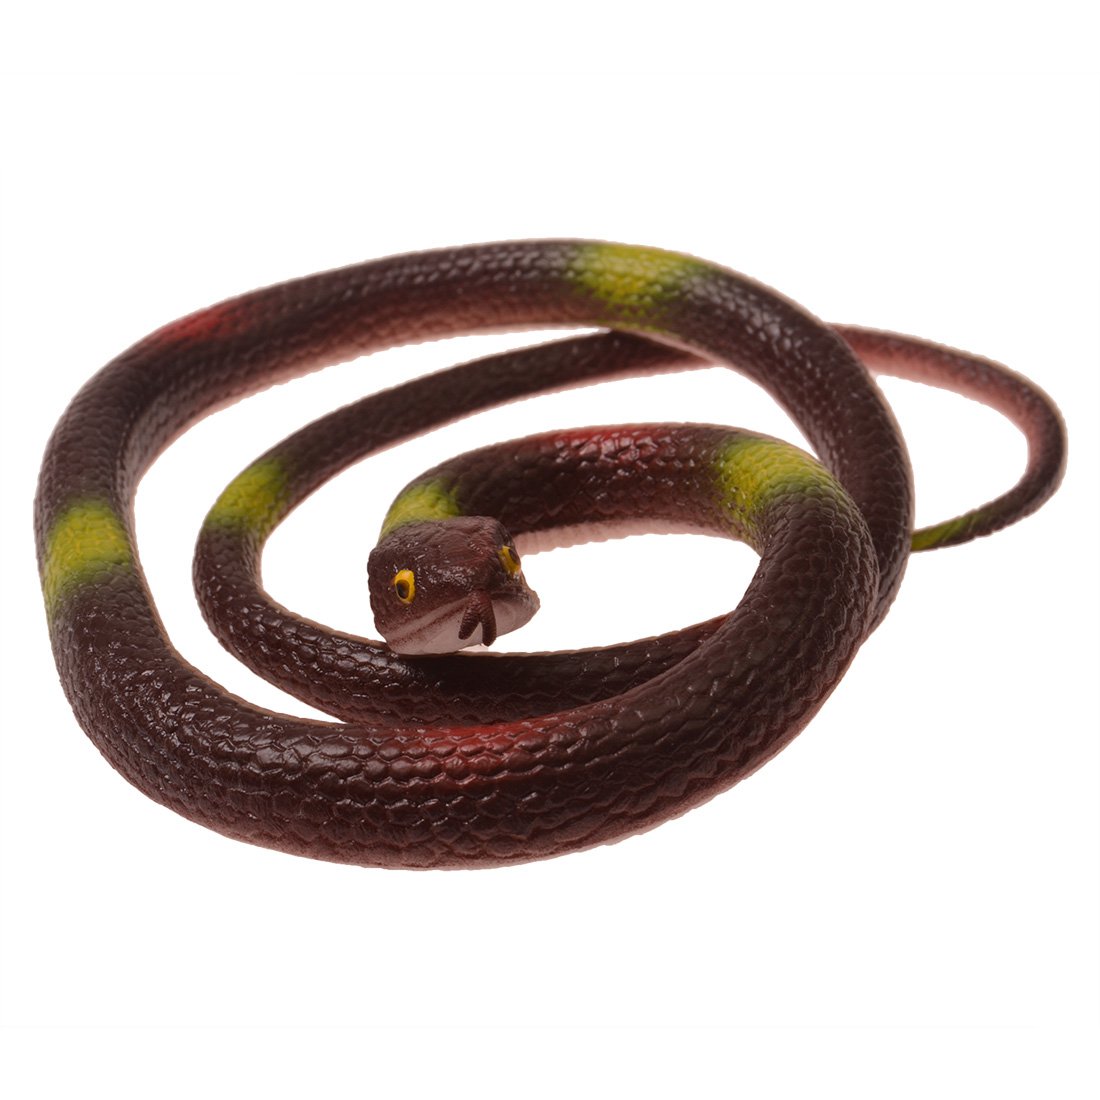 Realistic TPR Snake Toy Super Stretchy Trick Prop Children's Gift Toy ...